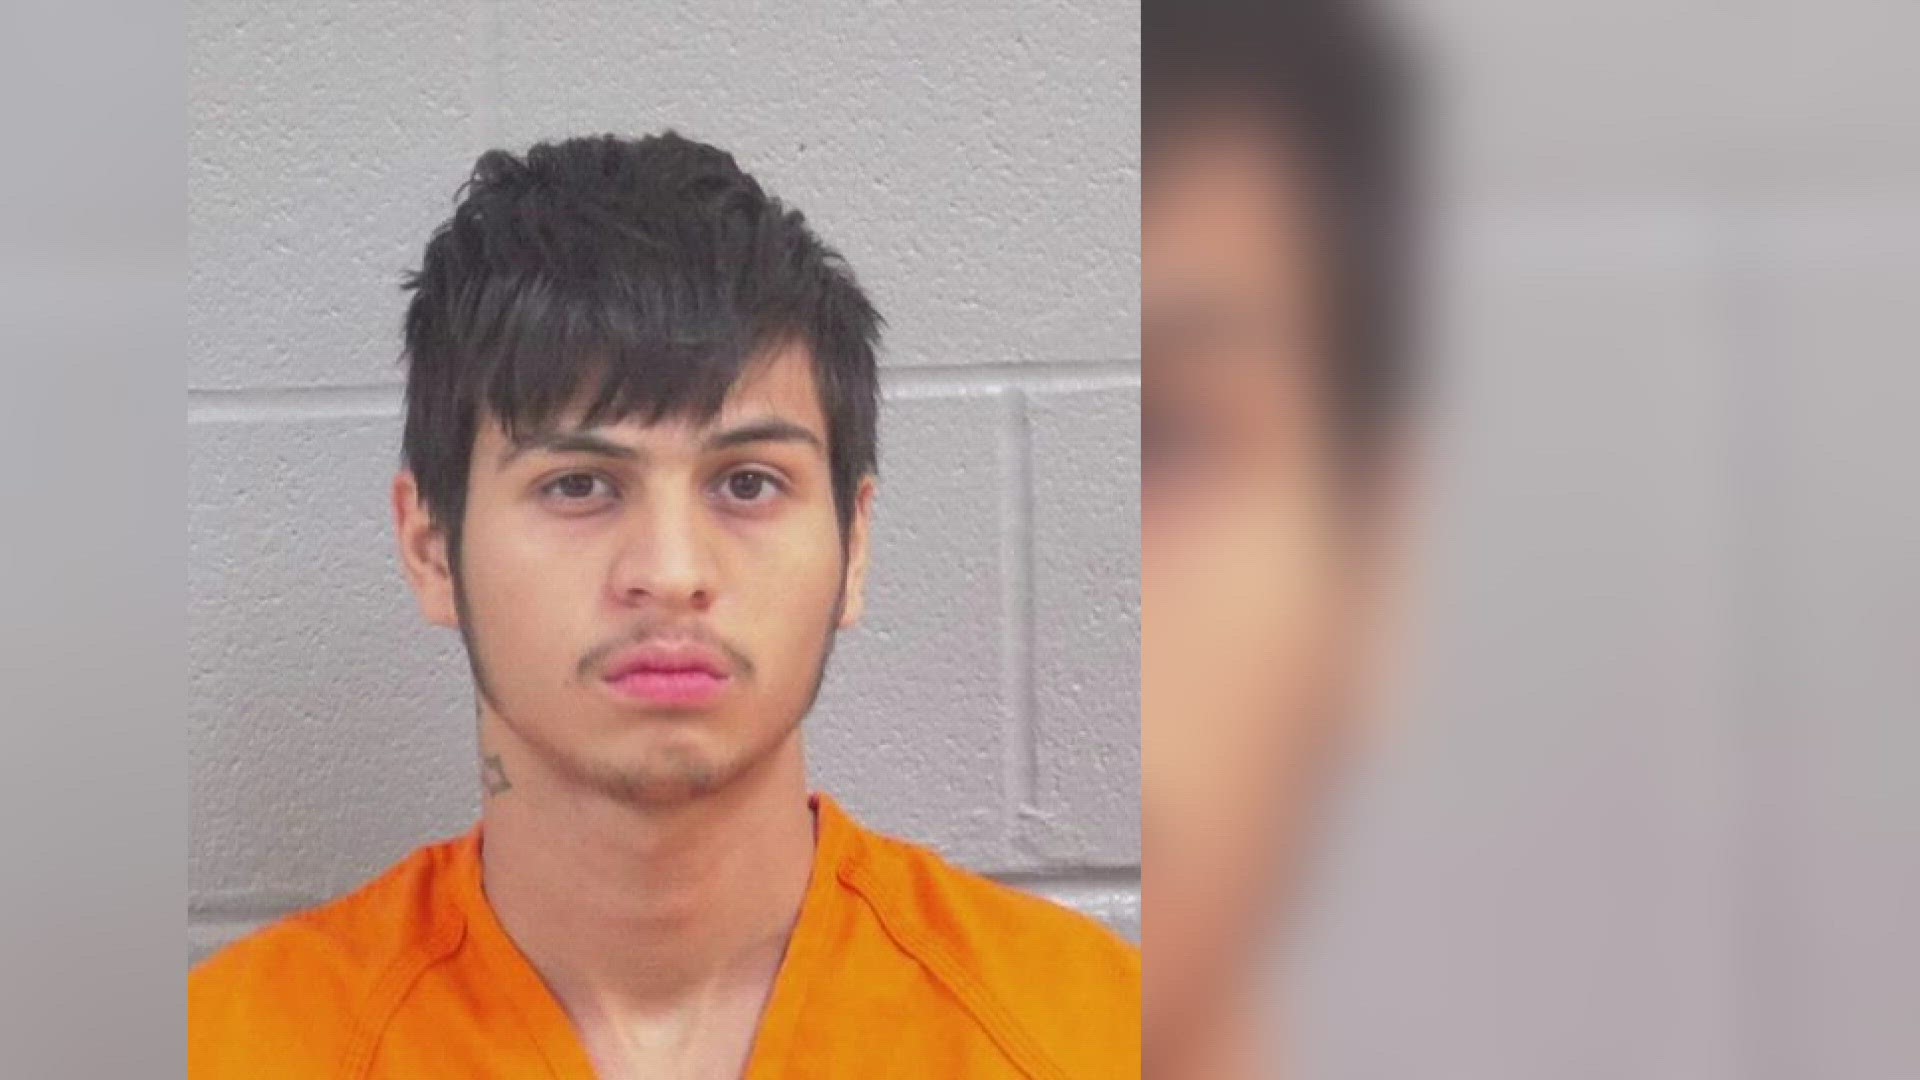 According to an arrest affidavit, Anthony Alexander Gomez was charged with murder Friday in Midland County where he remains as of Tuesday.